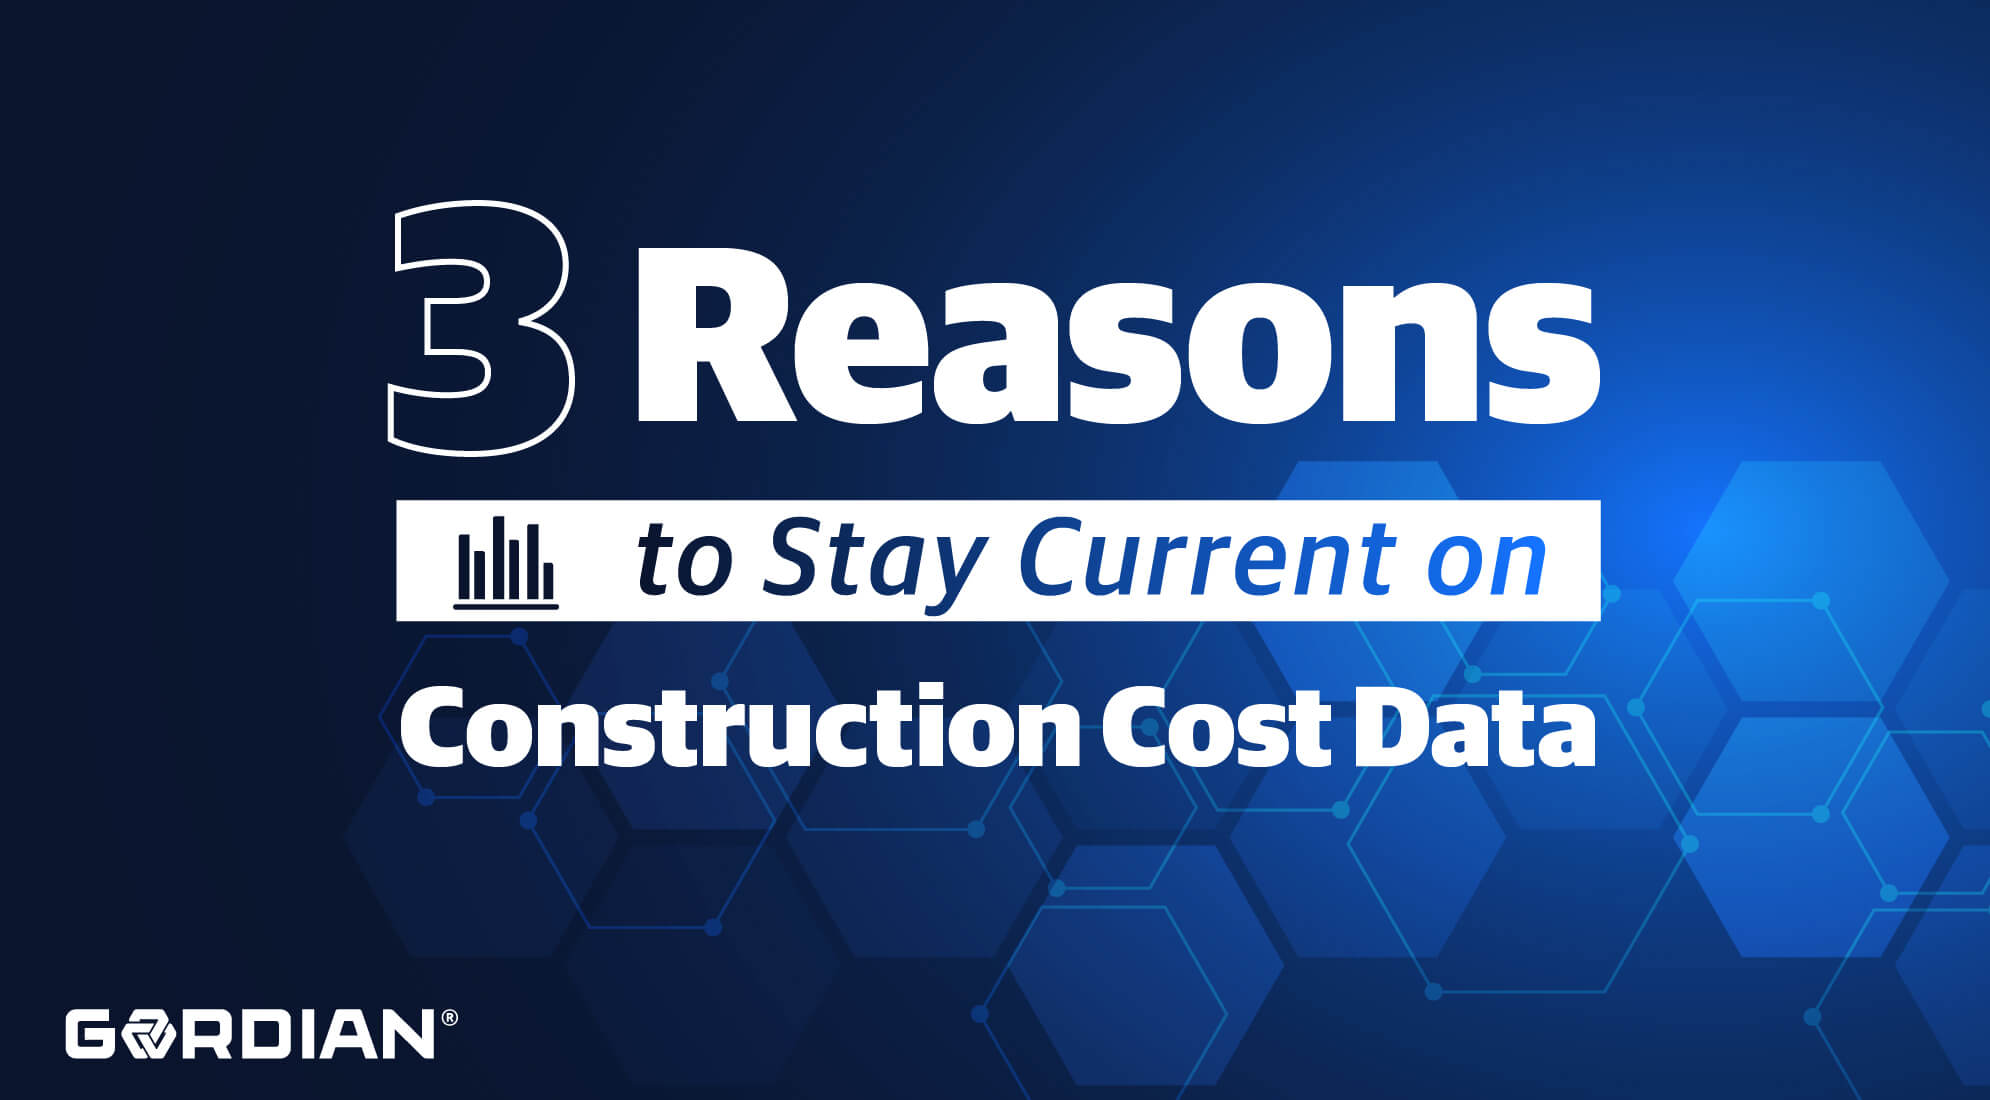 3 Reasons to Stay Current on Construction Cost Data 3